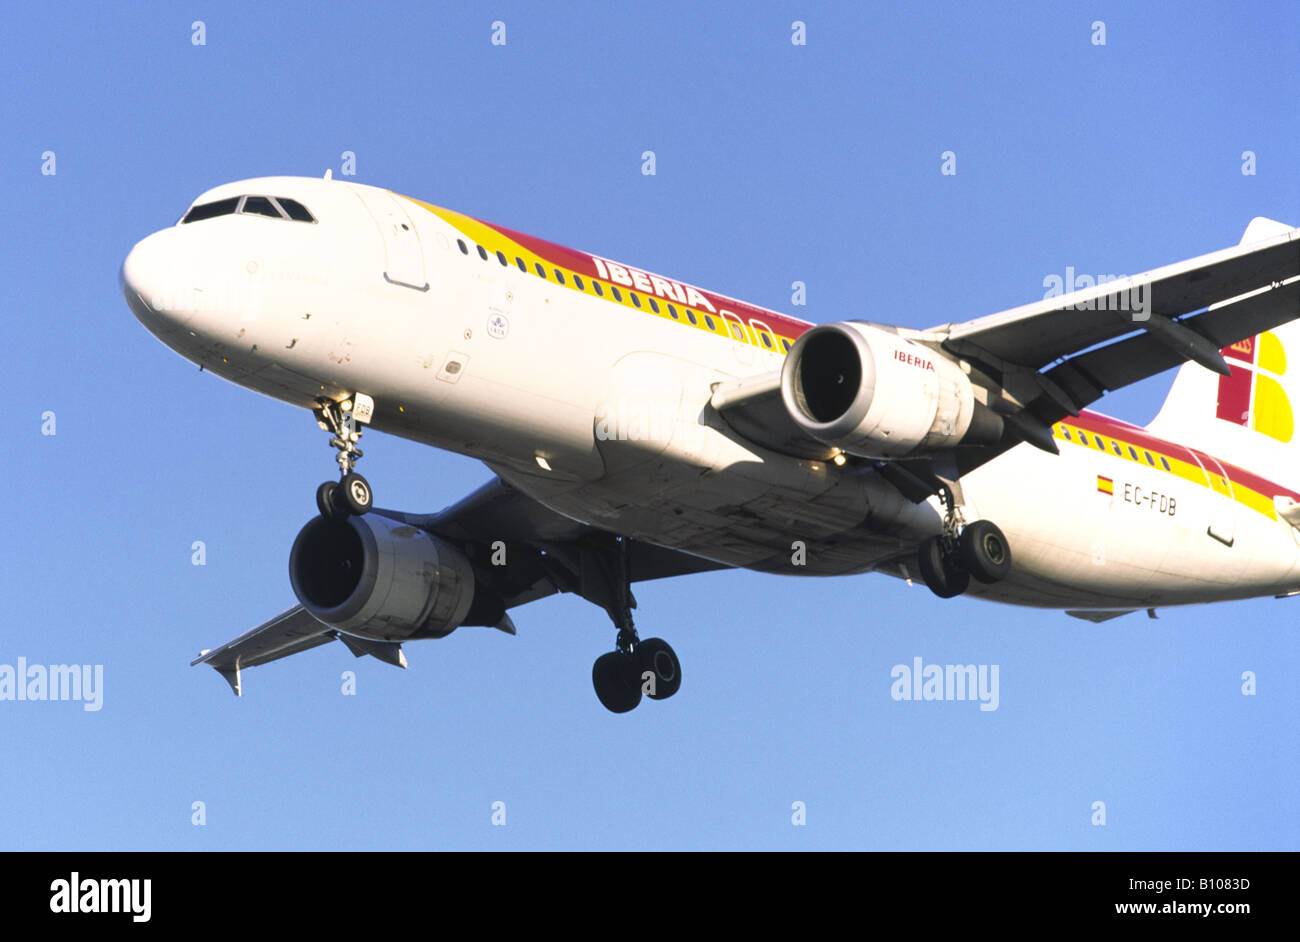 Airbus A320 operated by Iberia on approach to Heathrow Airport Stock Photo